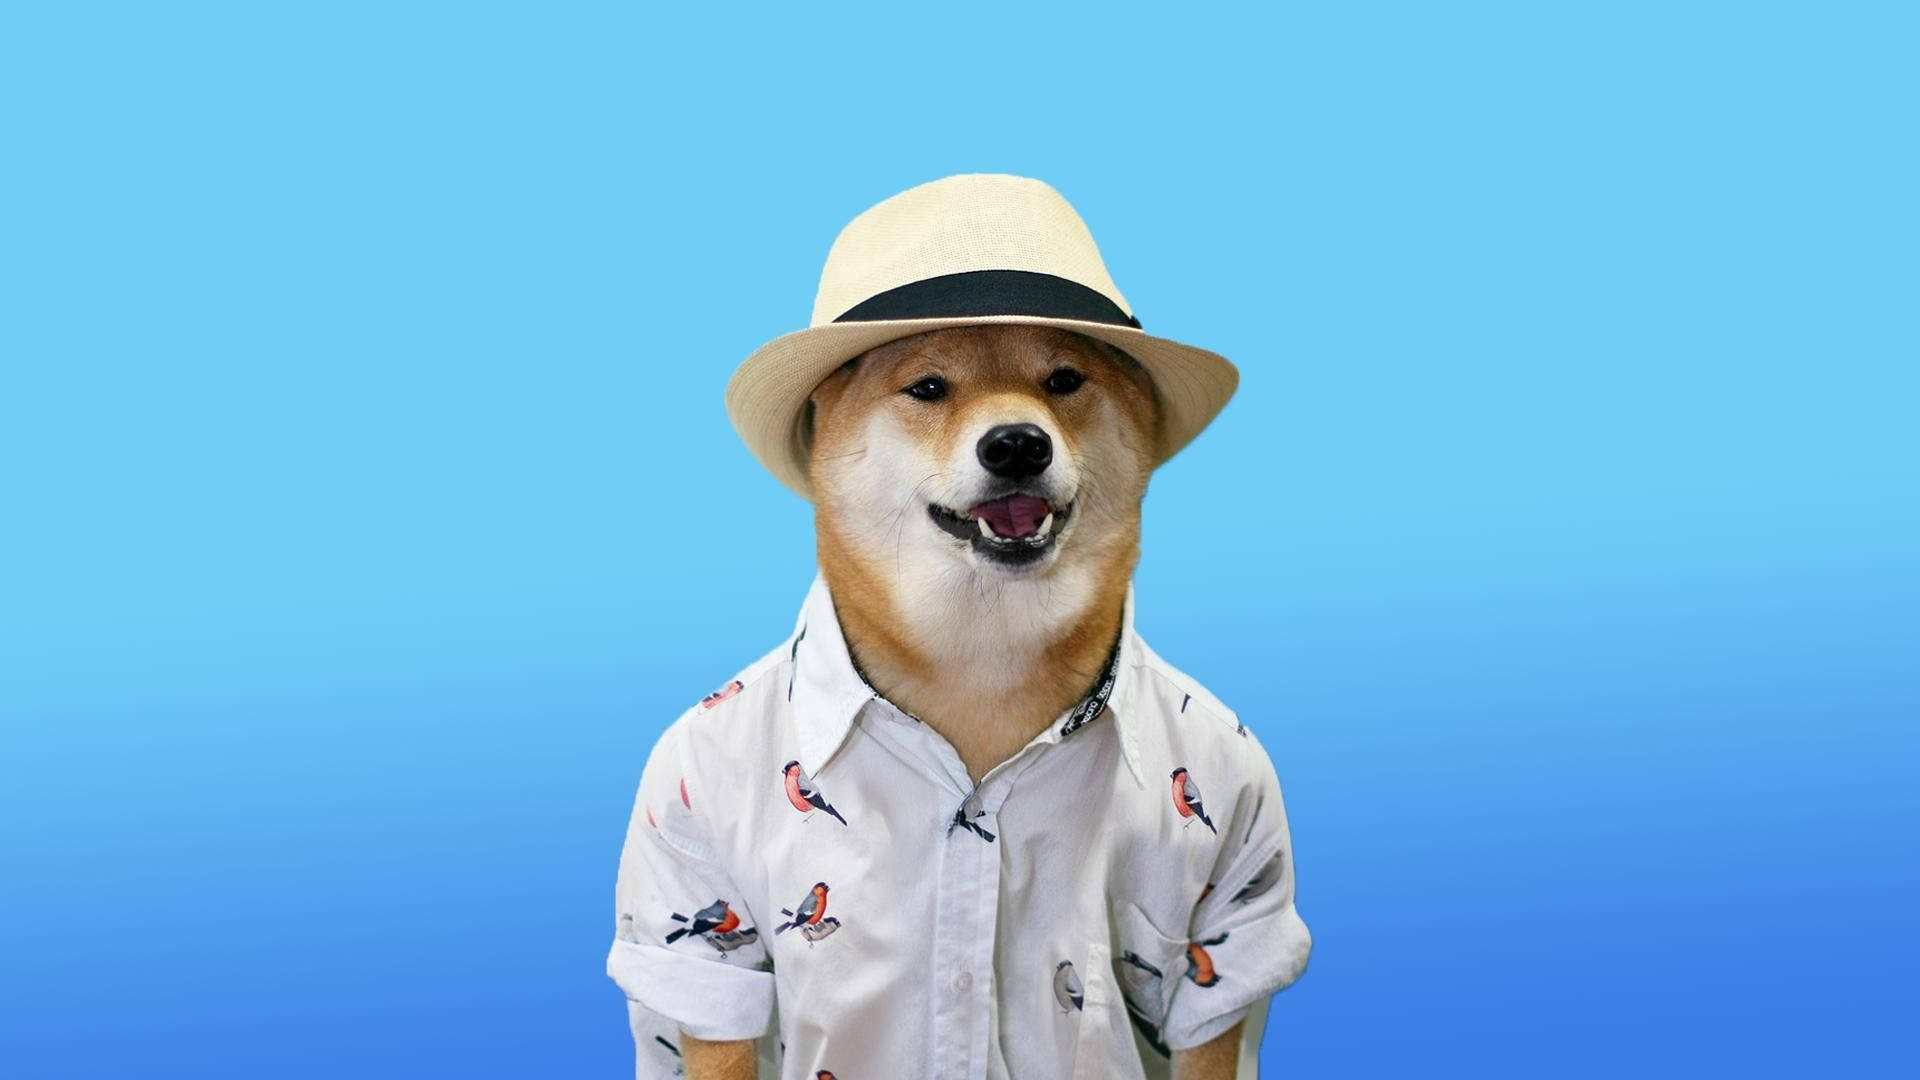 Doge Shiba Inu meme wearing Hawaiian shirt and hat, and smiling at the camera in a blue background.